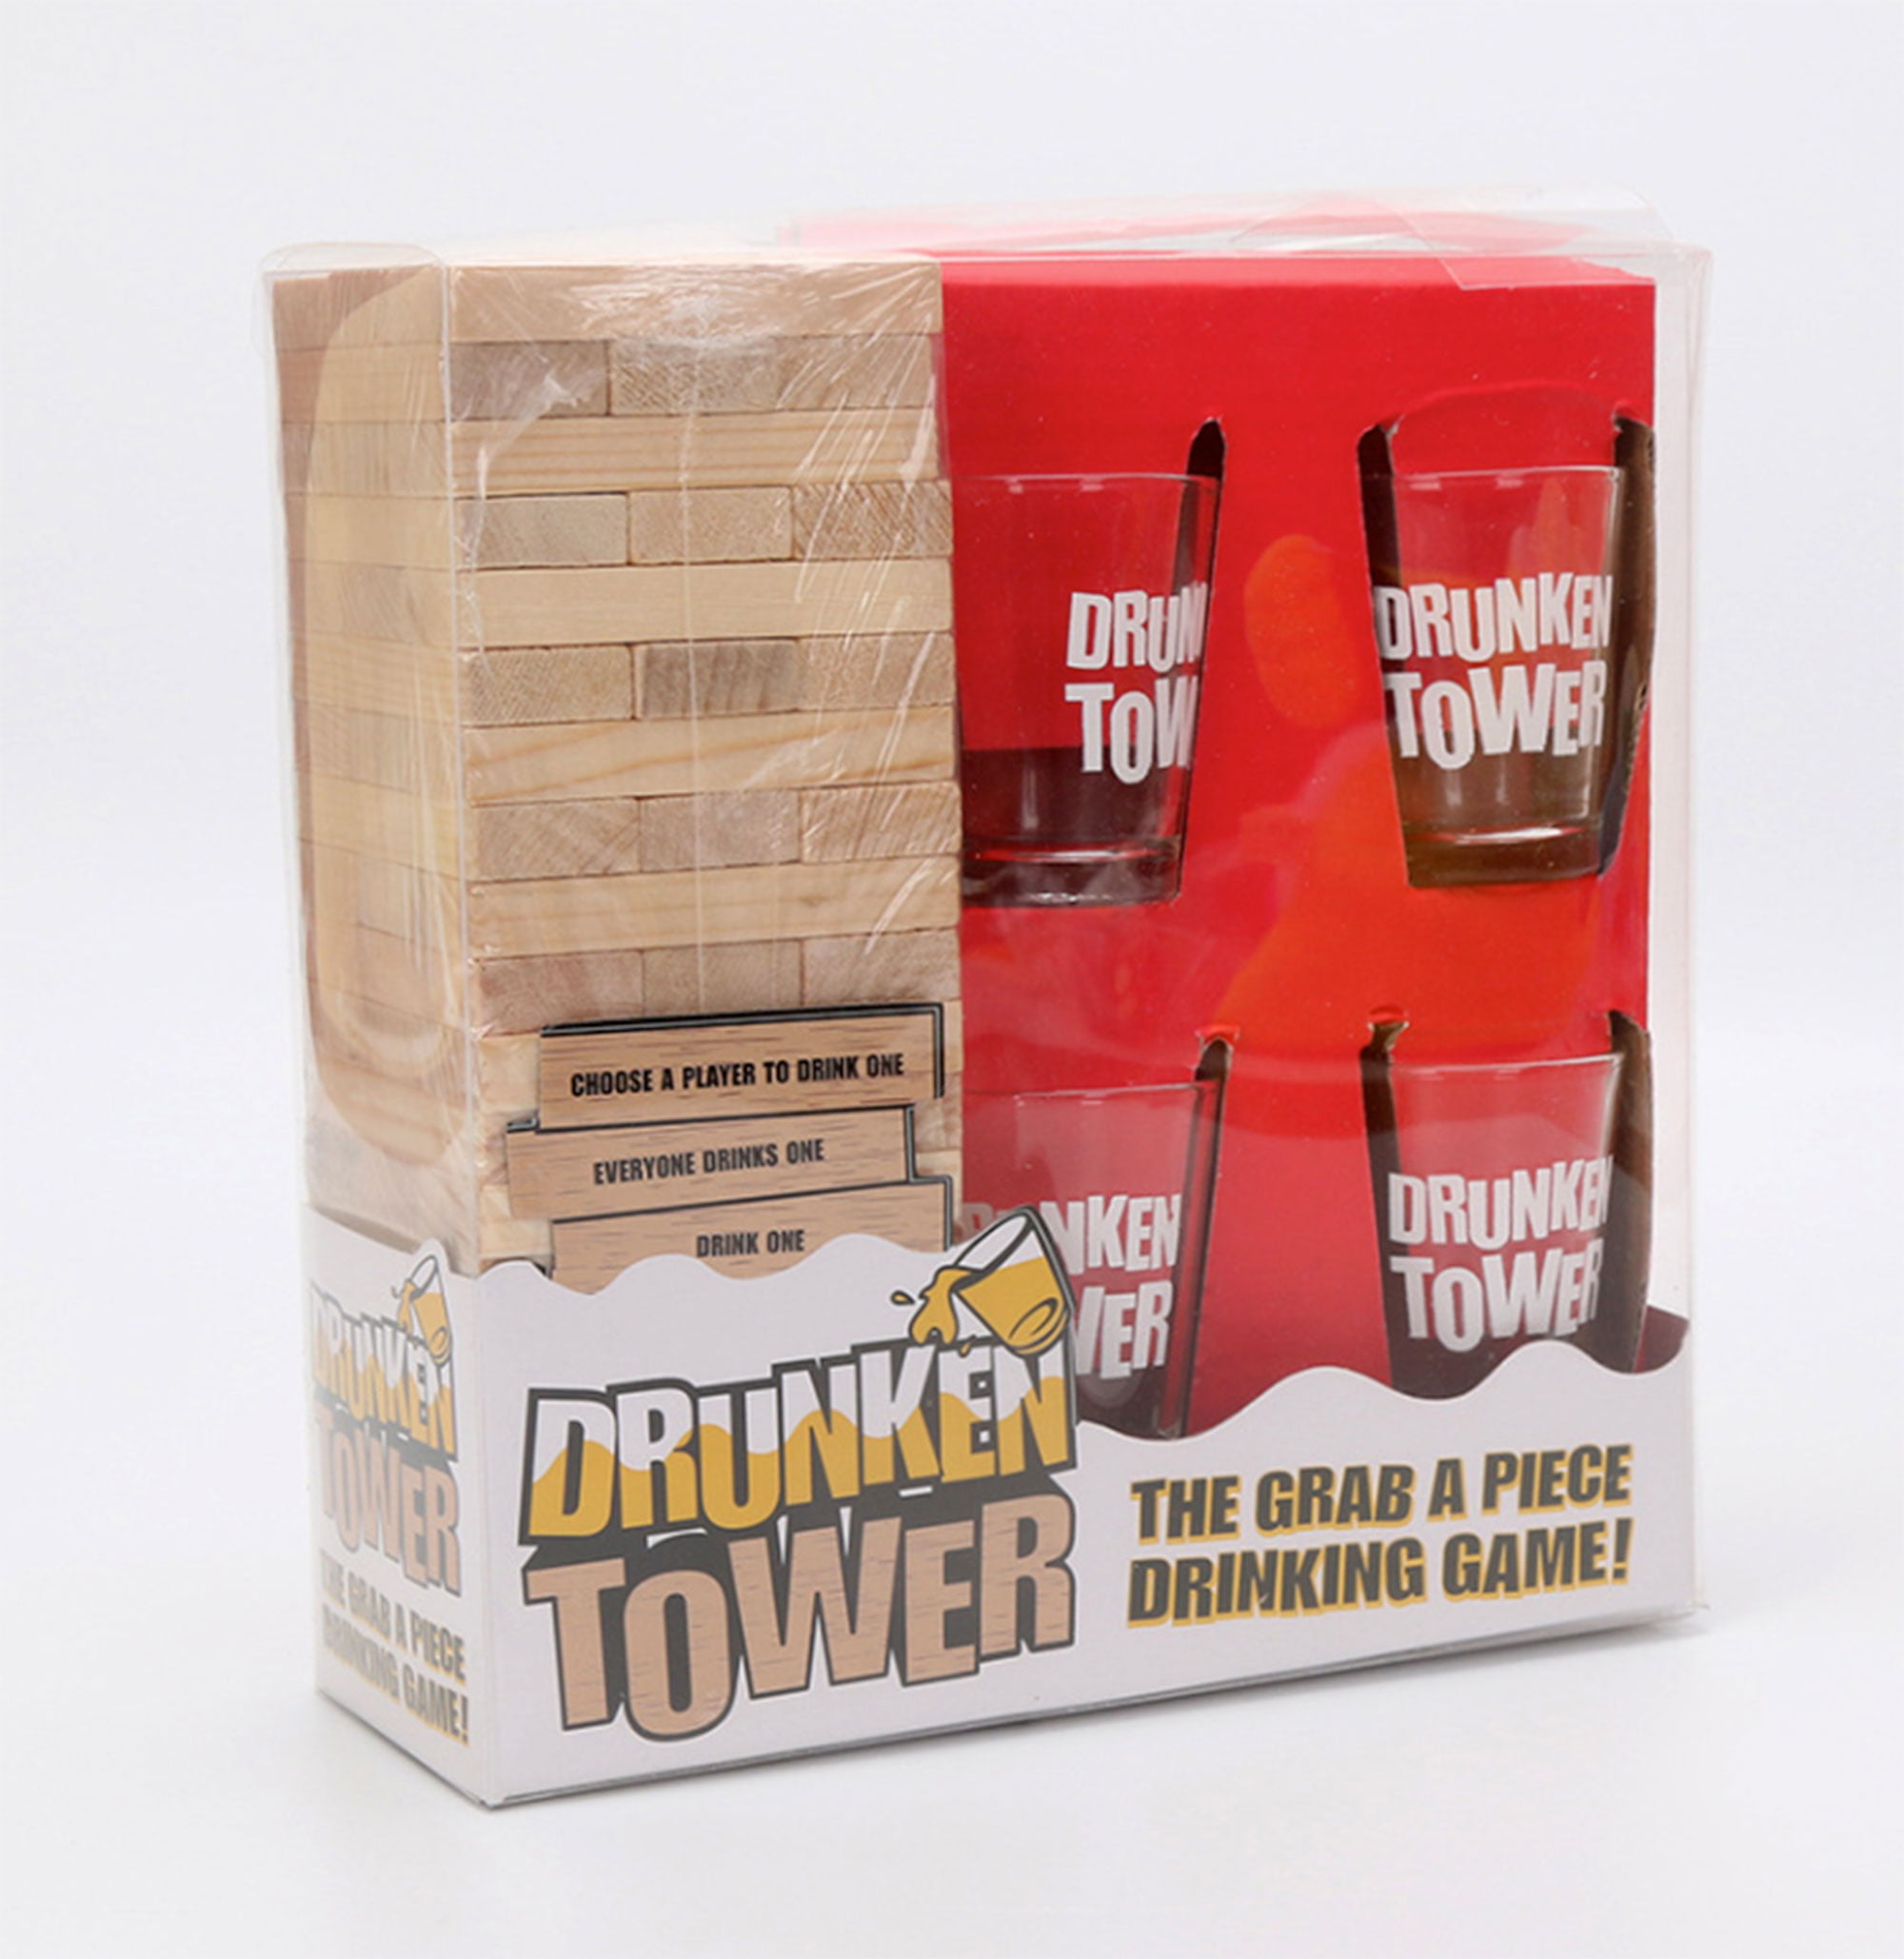 Drinking Tower